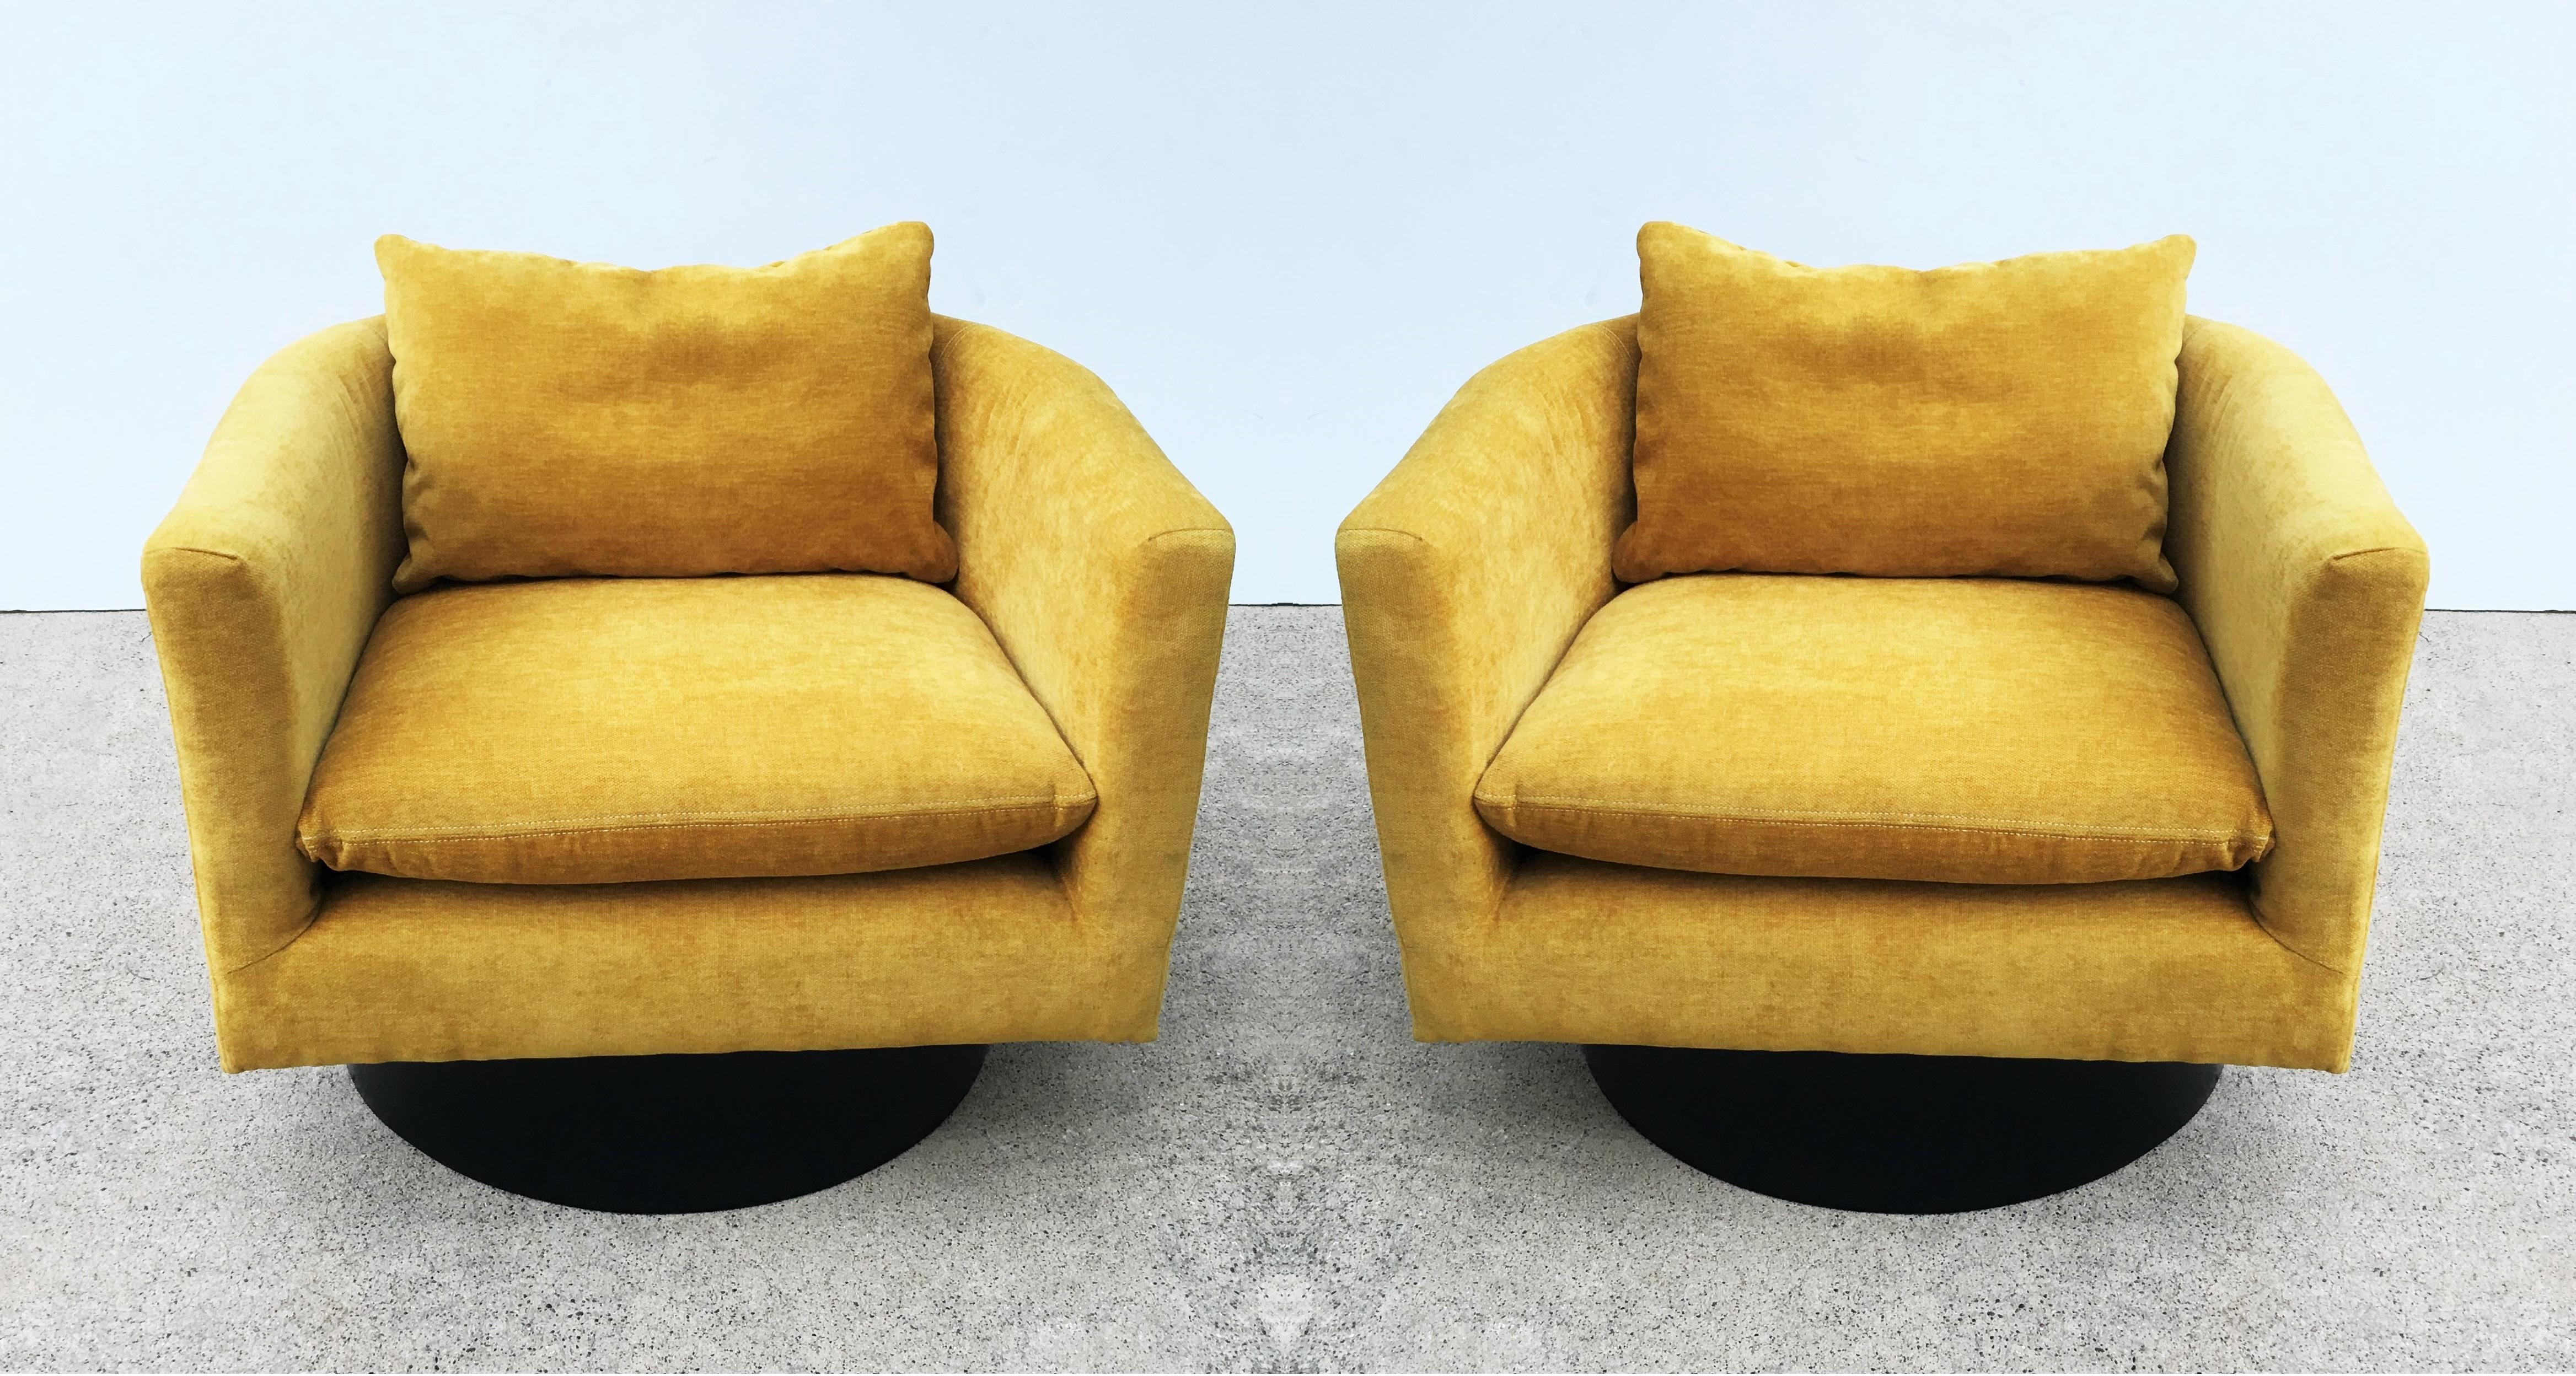 Handsome pair of very unusual swivel chairs designed by Milo Baughman, circa 1960s. Completely restored, newly upholstered in a stunning yellow fabric and resting on high ebonized bases. These bold club/lounge chairs make a colorful statement in any